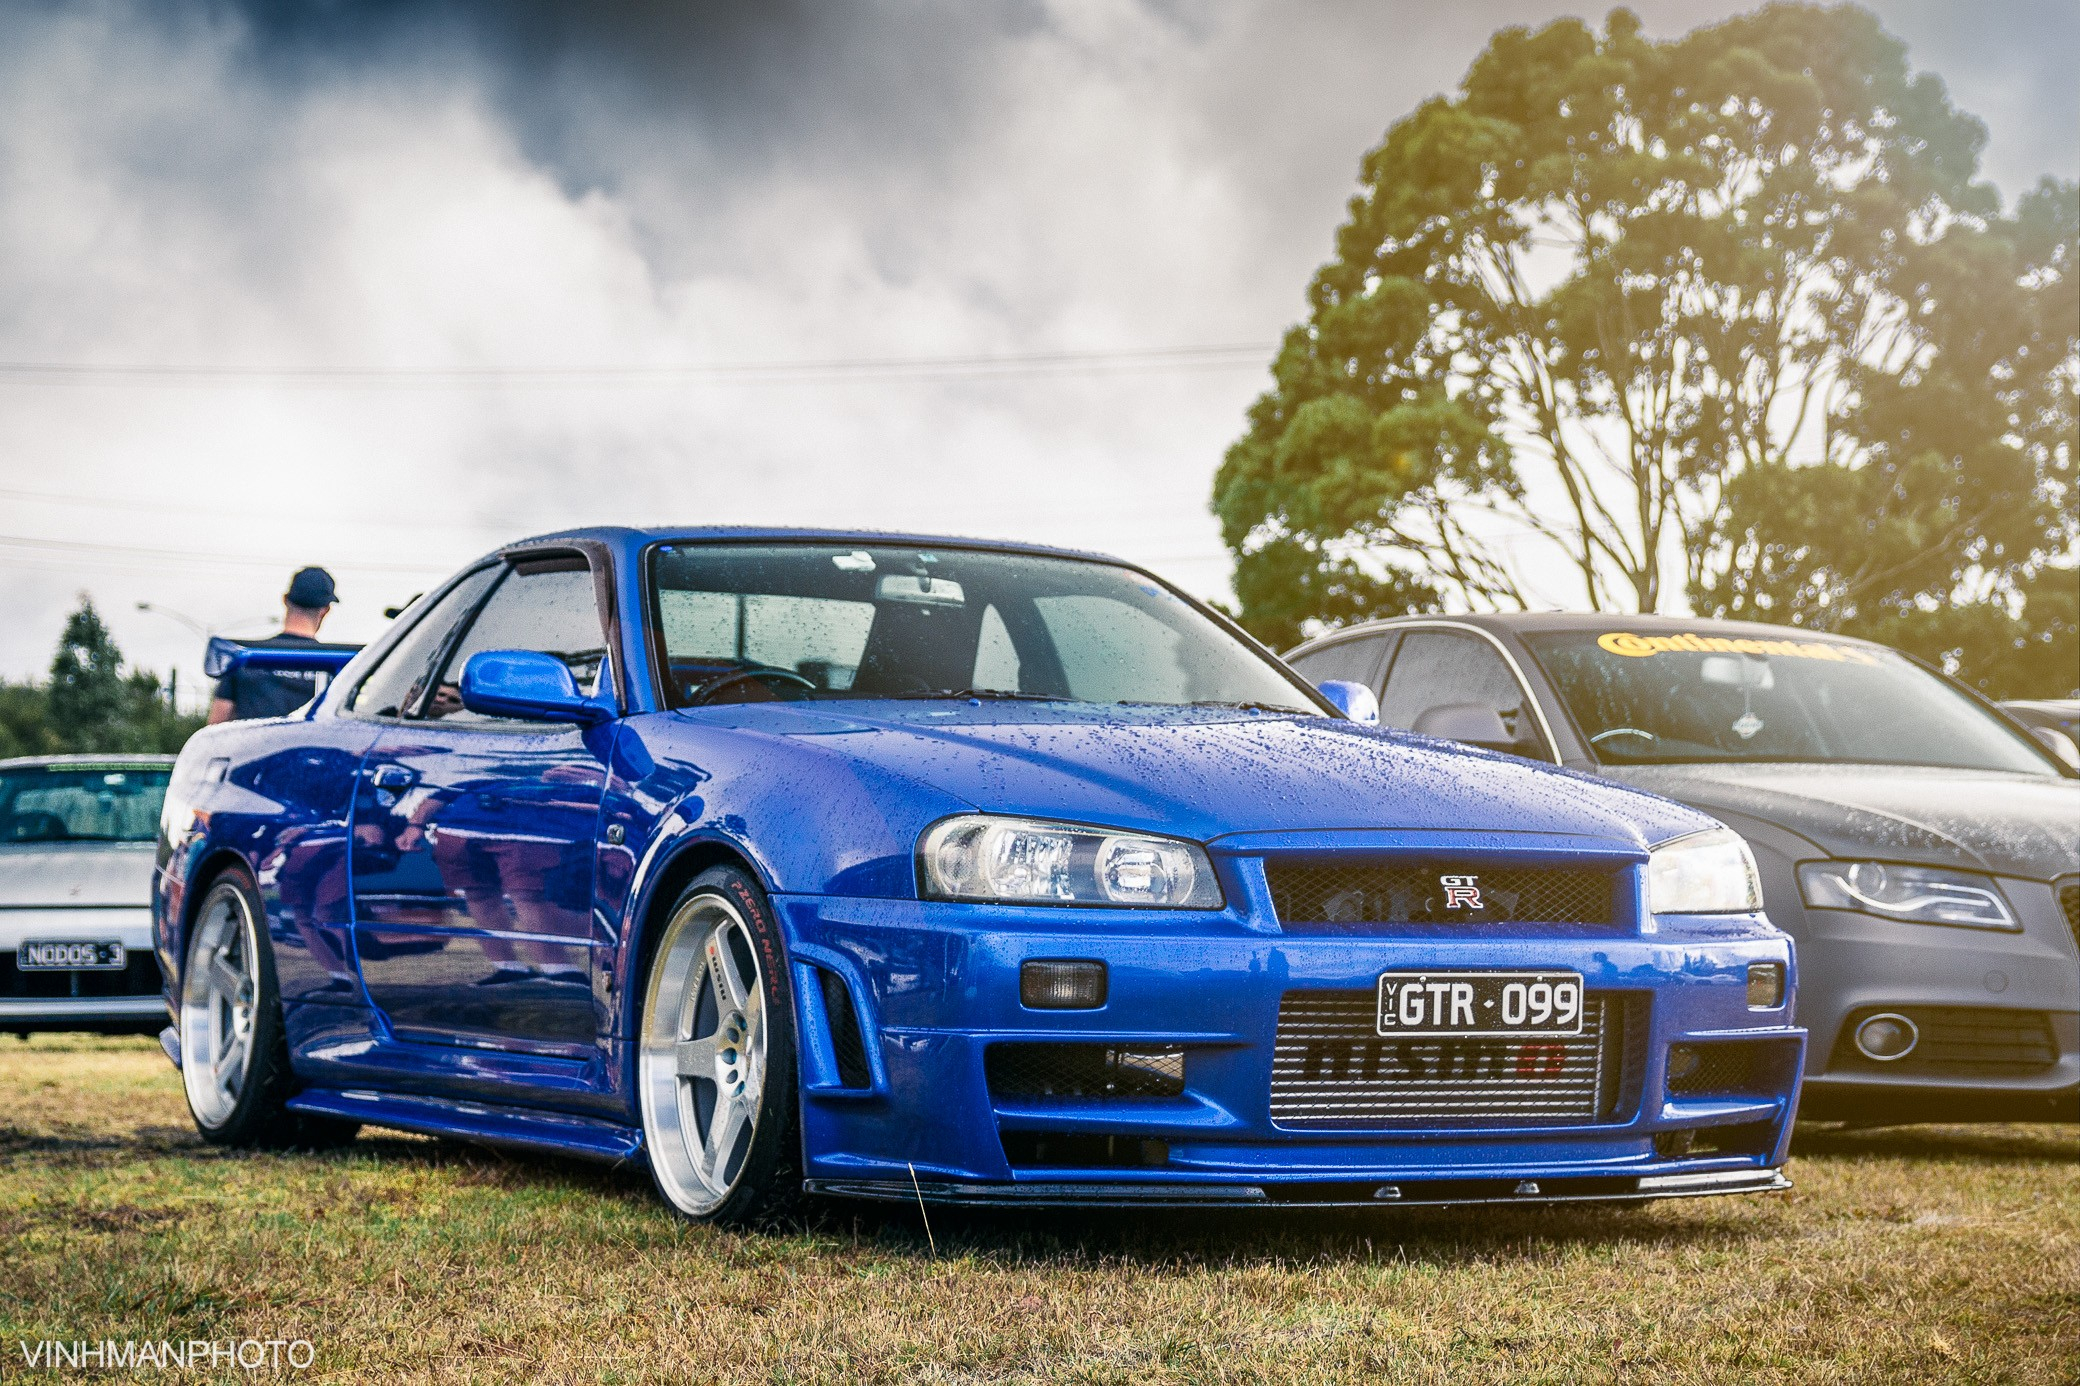 2080x1386 10+ Nissan Skyline R34 HD Wallpapers and Backgrounds